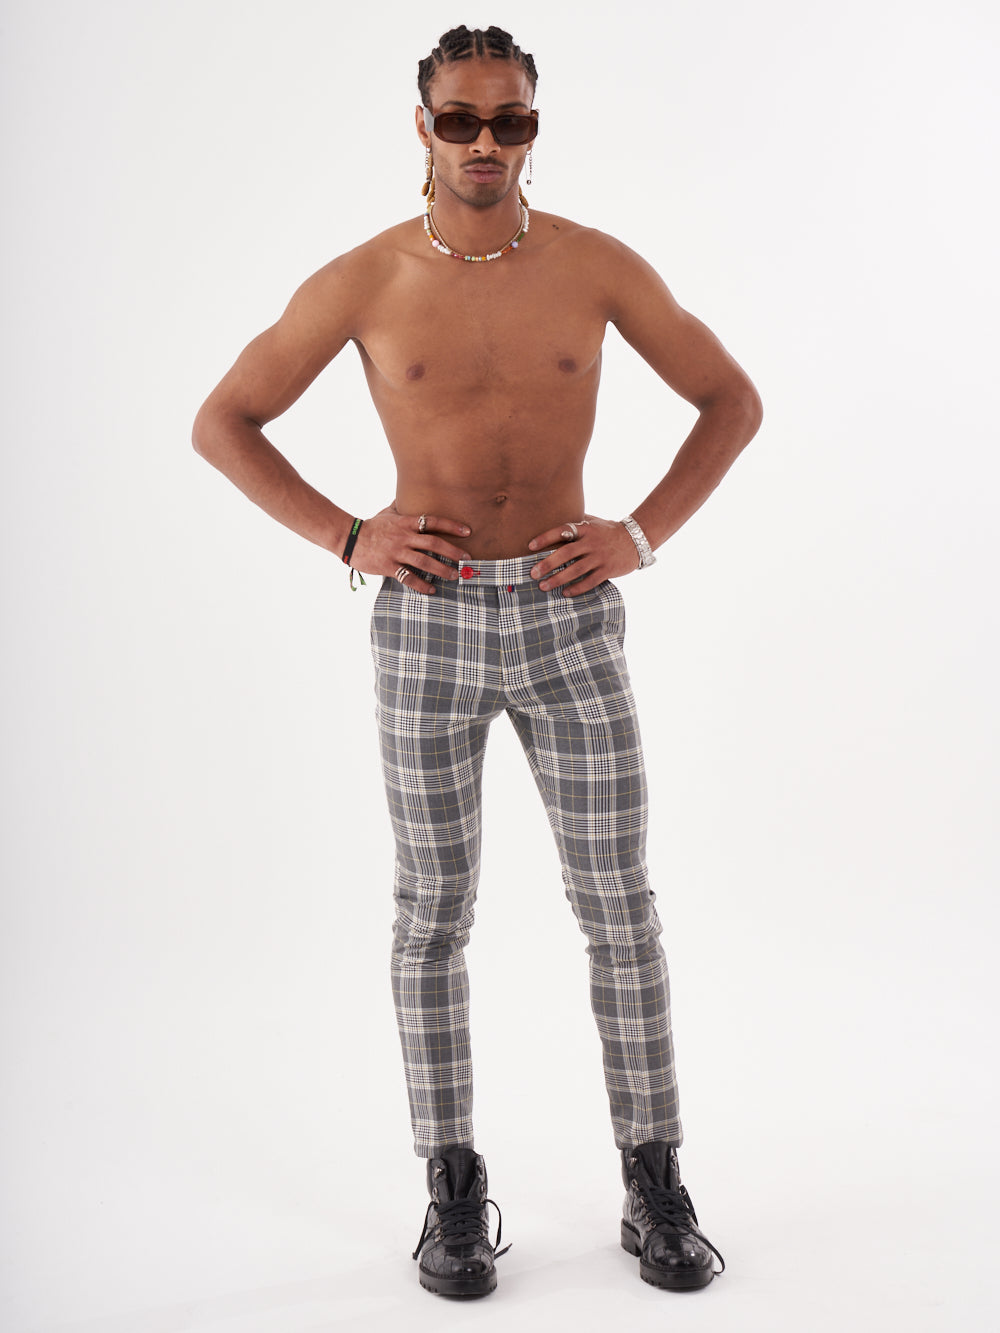 A man is posing for a photo in a grey Checkmate pants.